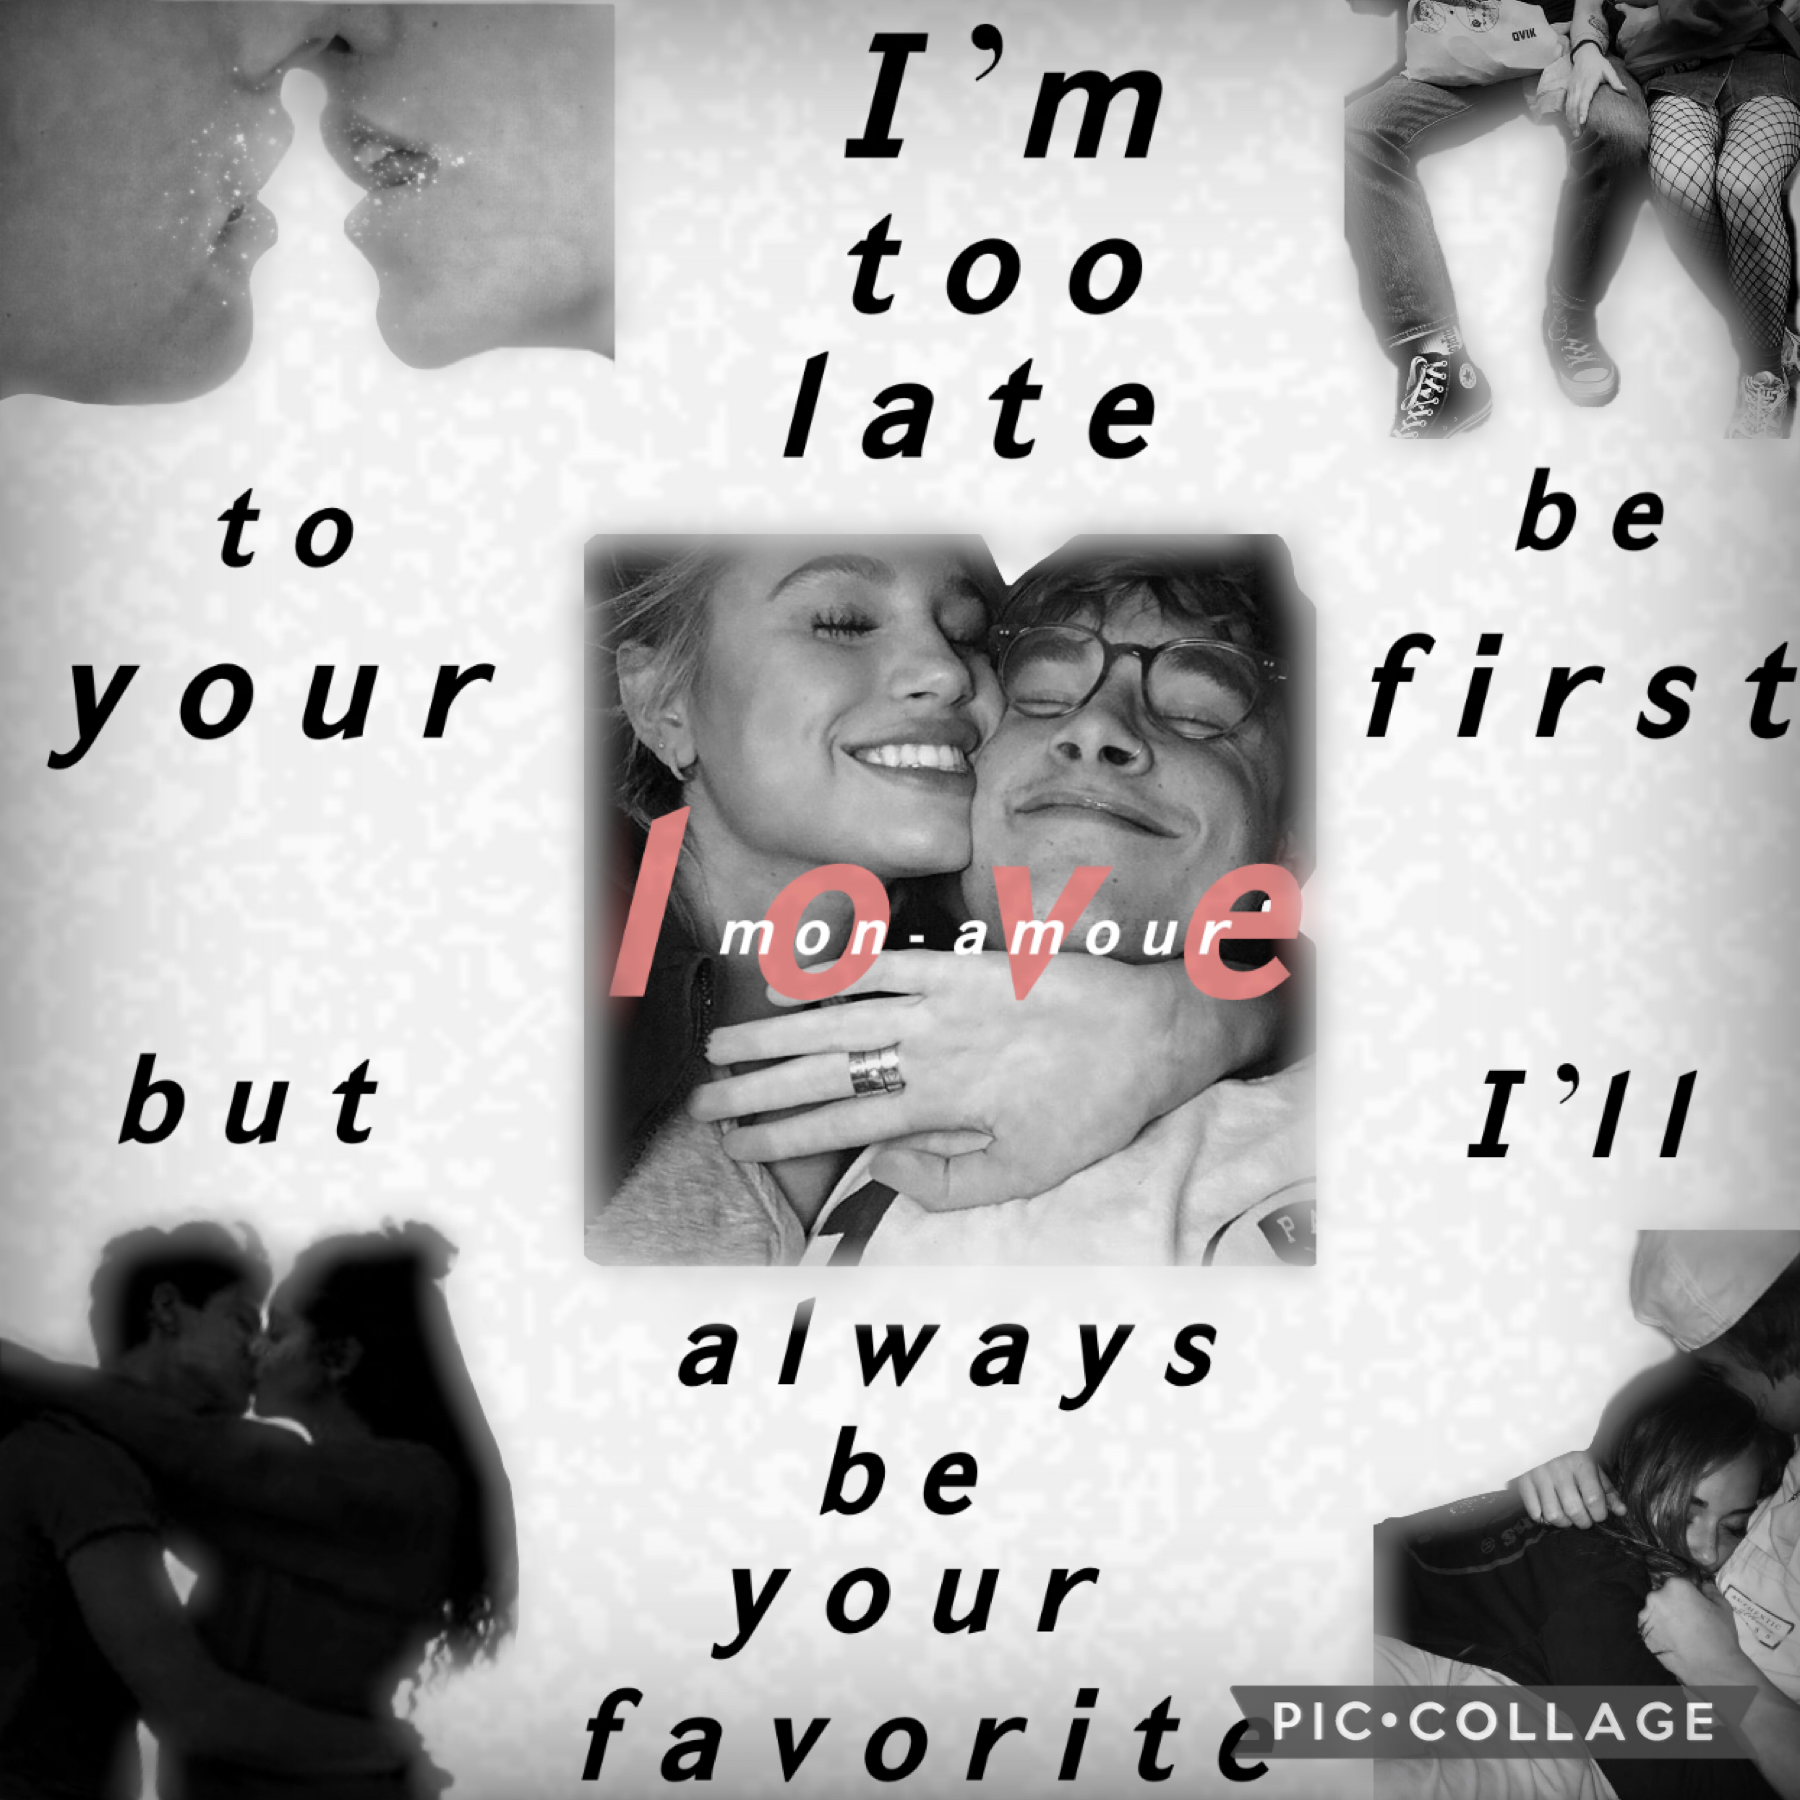 t a p  m y  l o v e s 
I LOVE THIS ONE AHHHH (lyrics from bc I liked a boy-Sabrina carpenter) 
entry to Pic-Collage_Awards’ contest!
The words are kinda all over the place but it says “I’m too late to be your first love but I’ll always be your favorite”
L